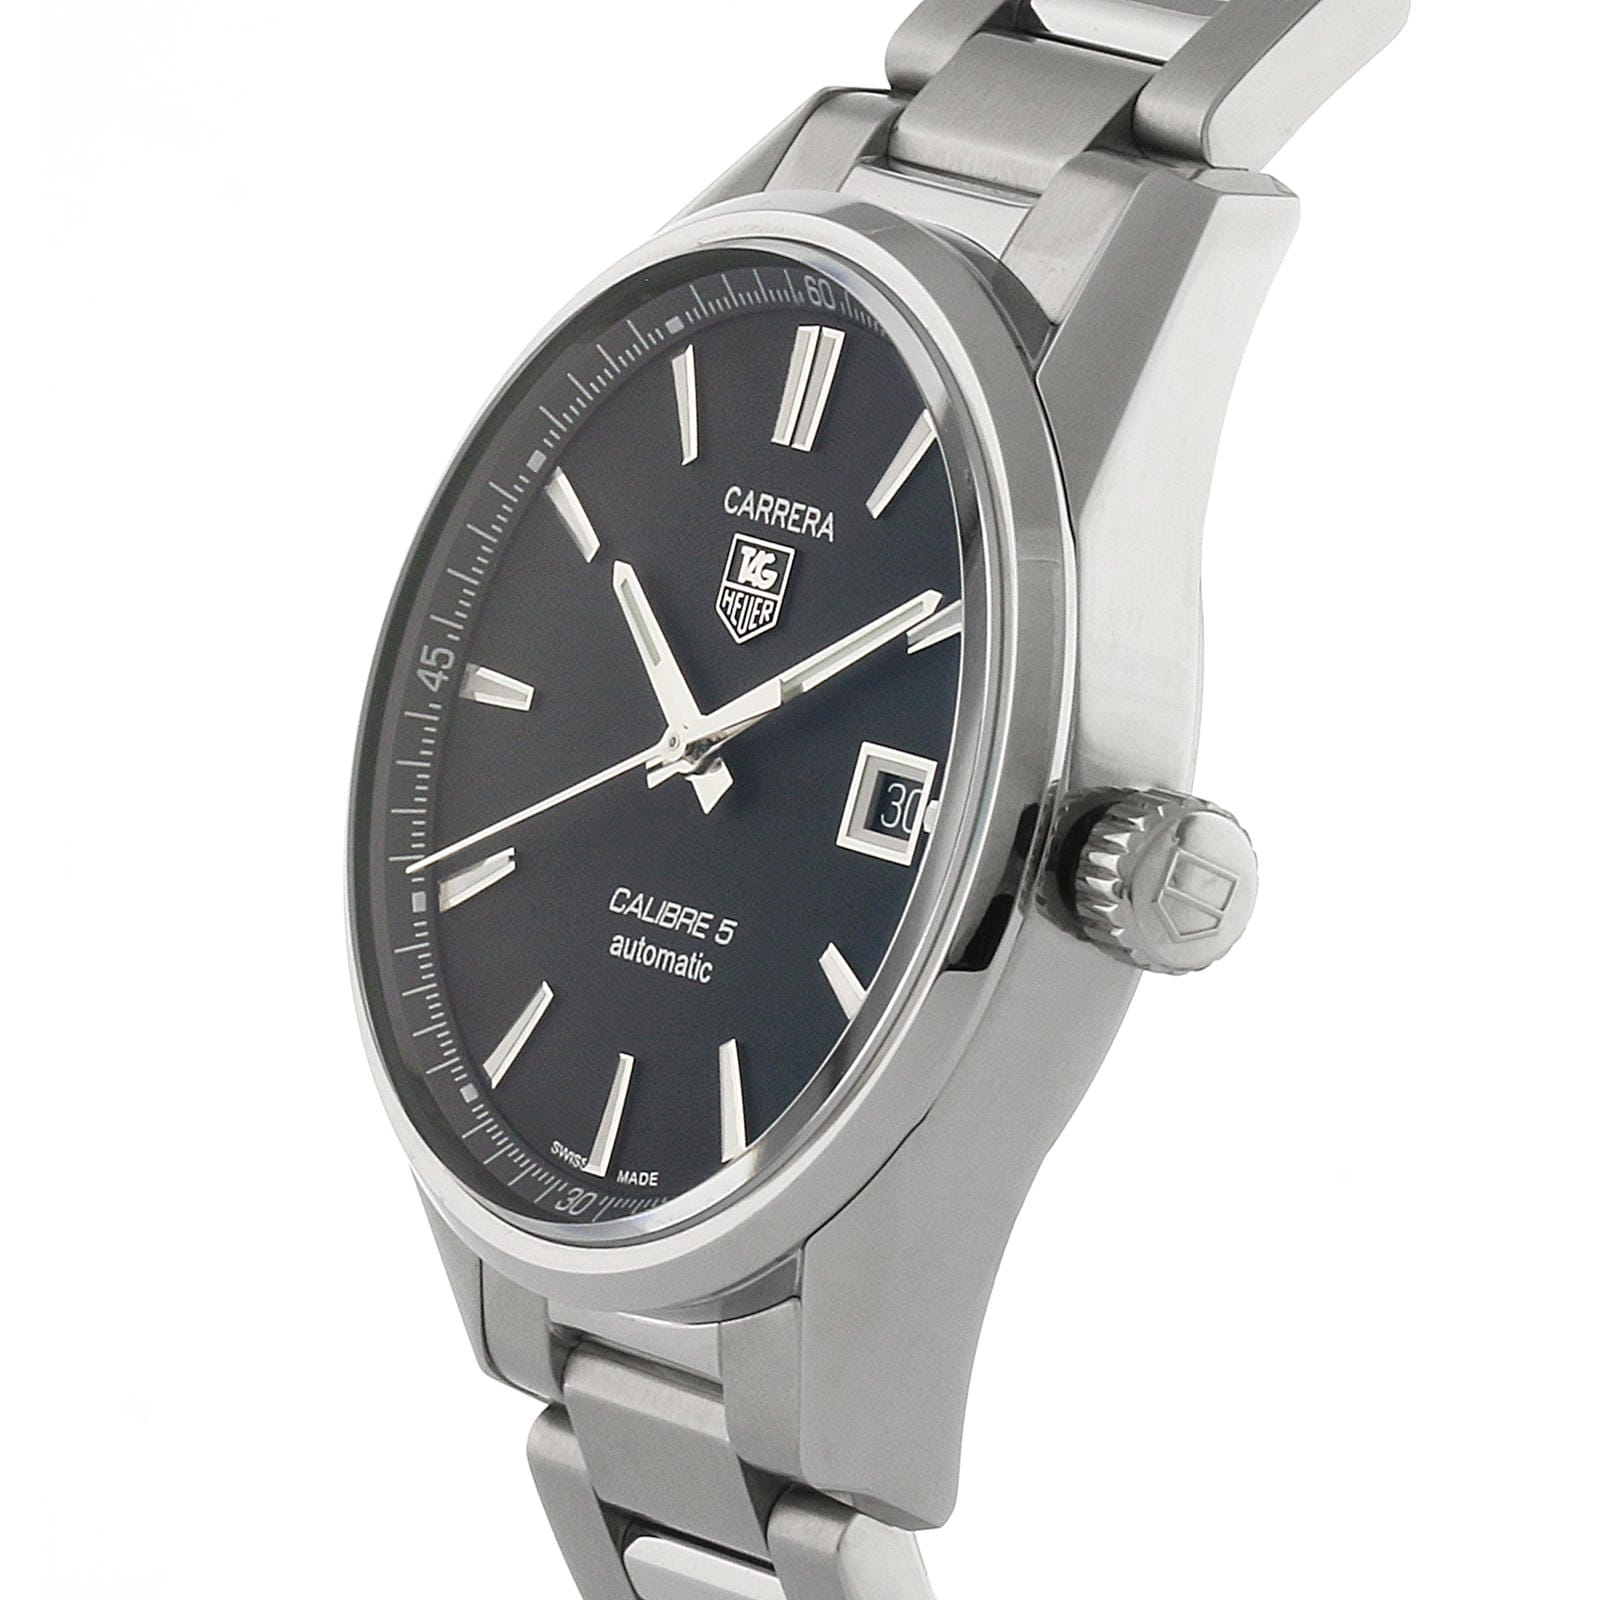 tag heuer calibre 5 winds clockwise or counterclockwise